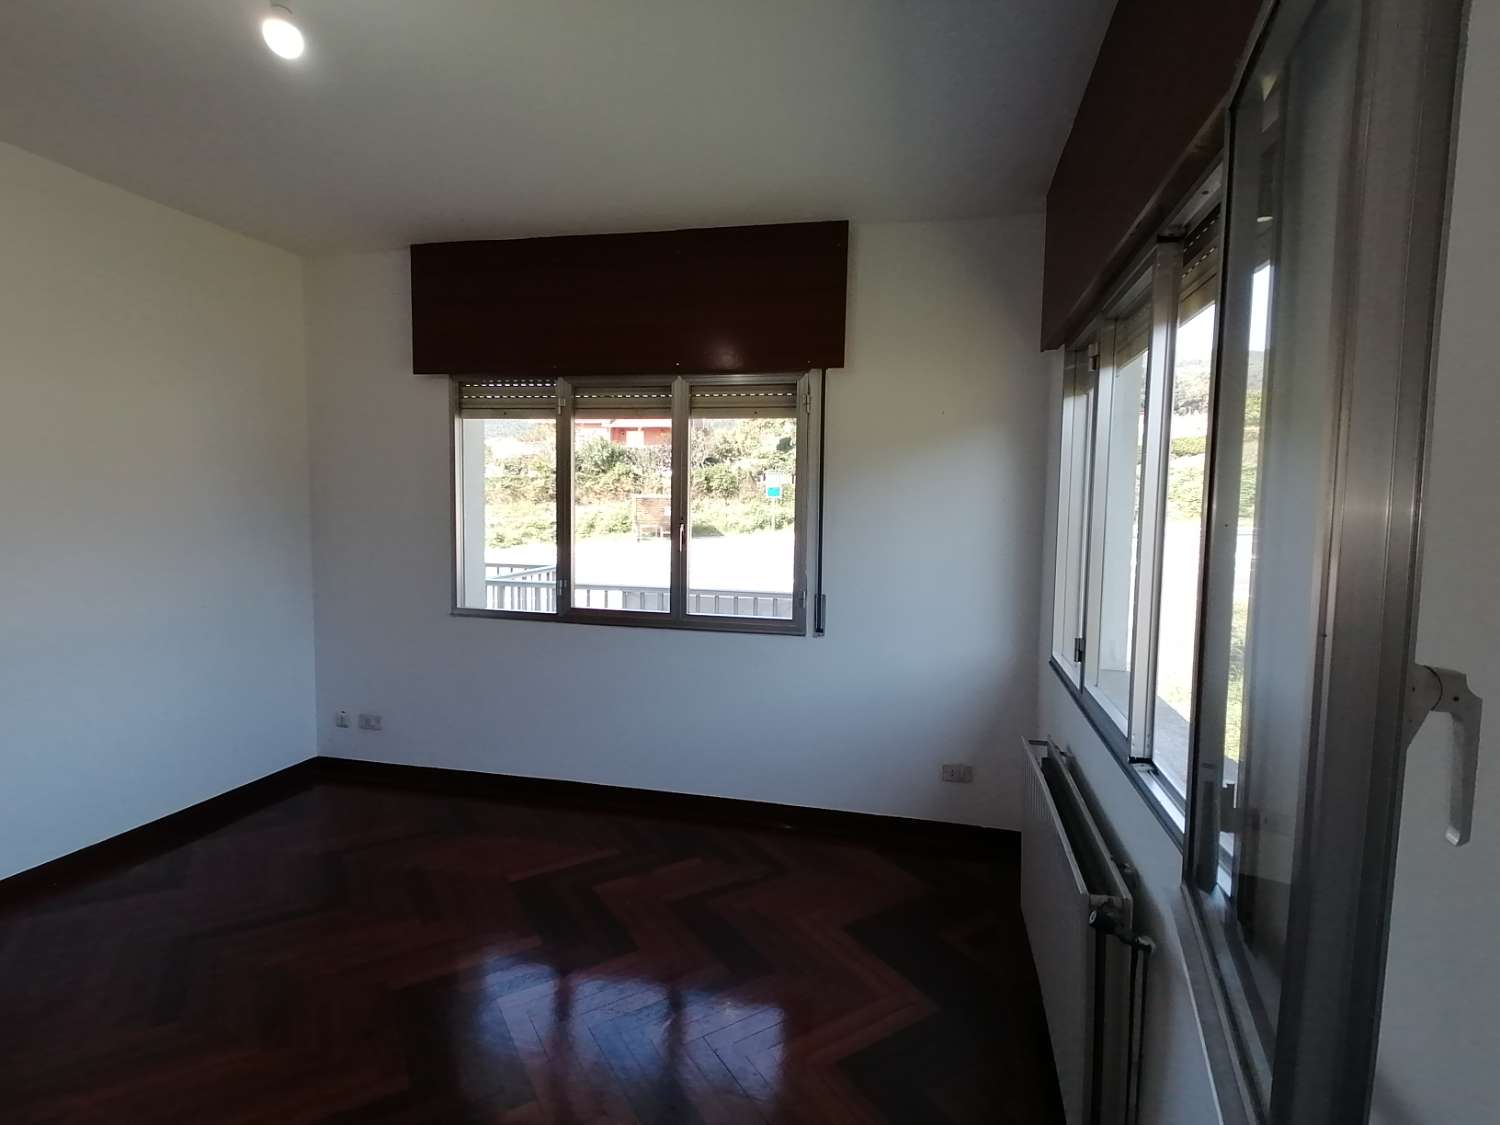 Pontevedra: A7134: House with finca for sale 4 kms from Pontevedra...